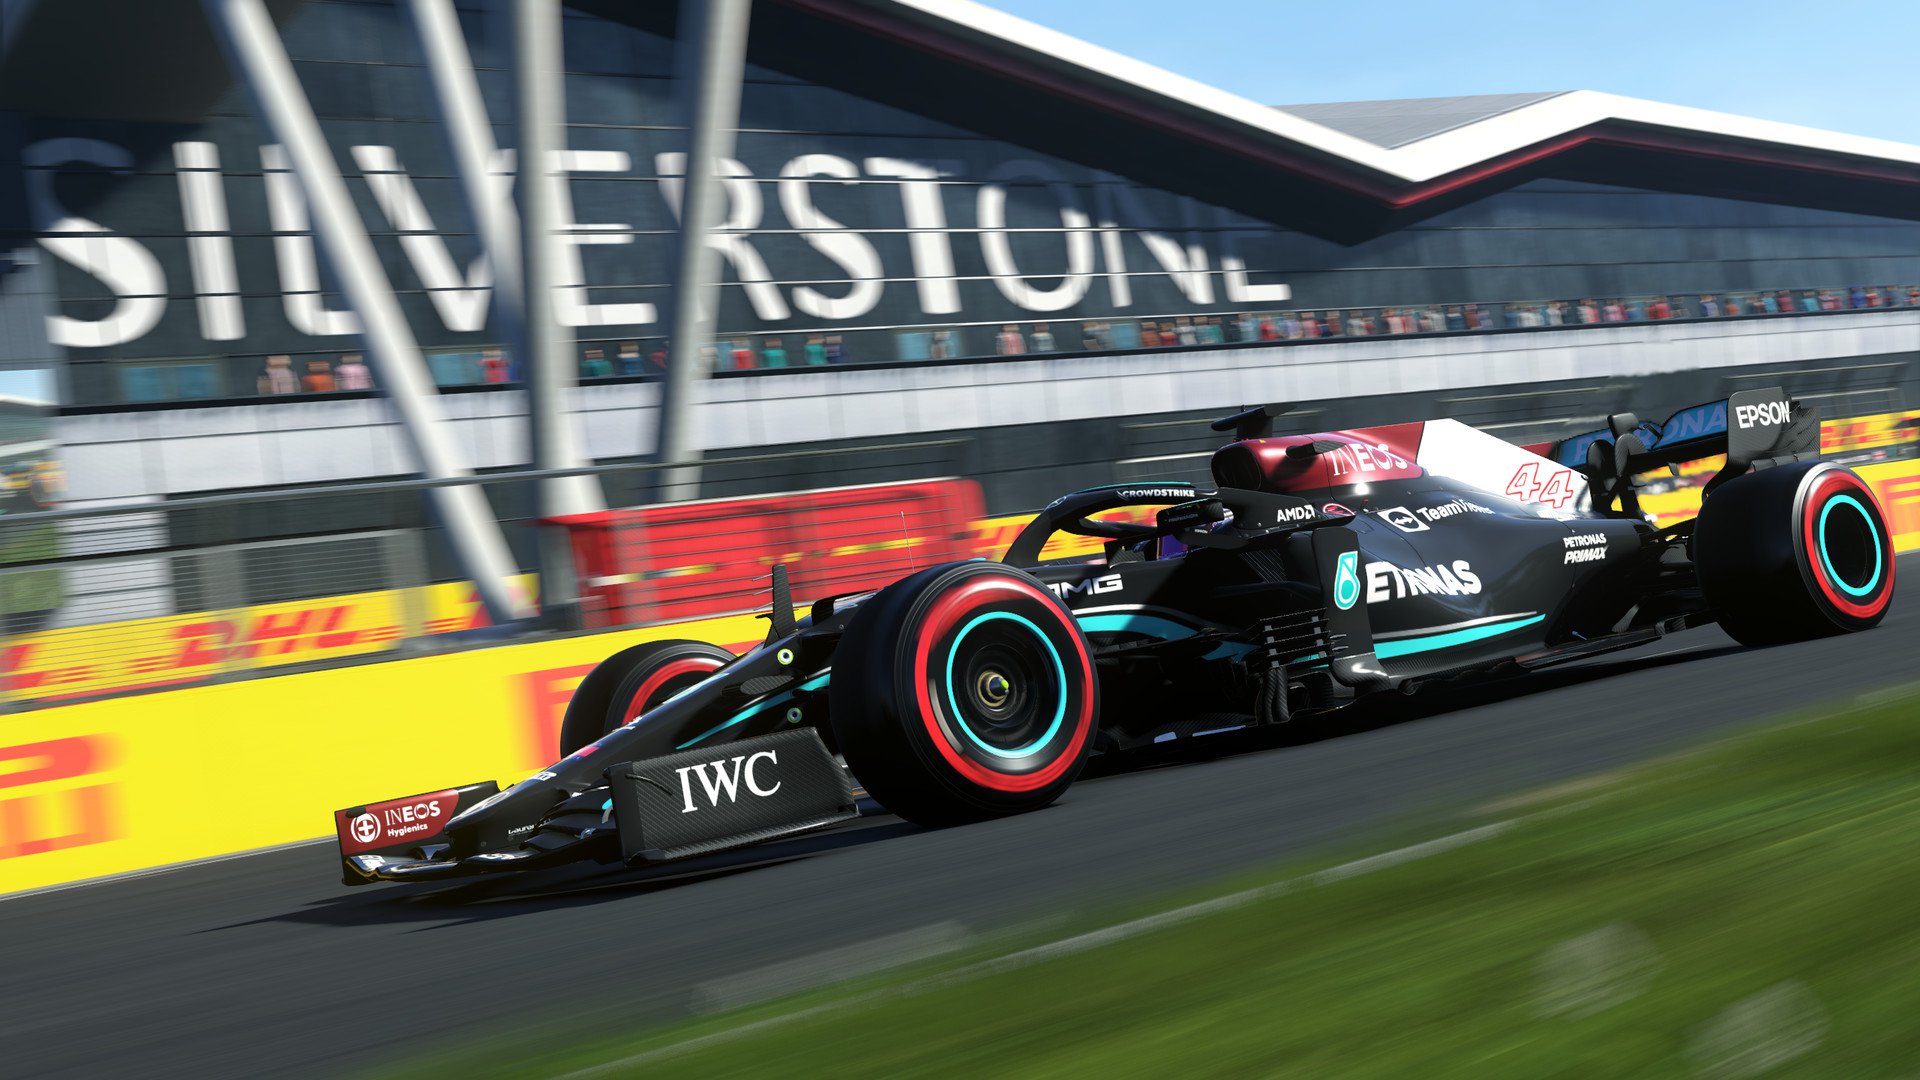 F1 2021 Deluxe Edition 7